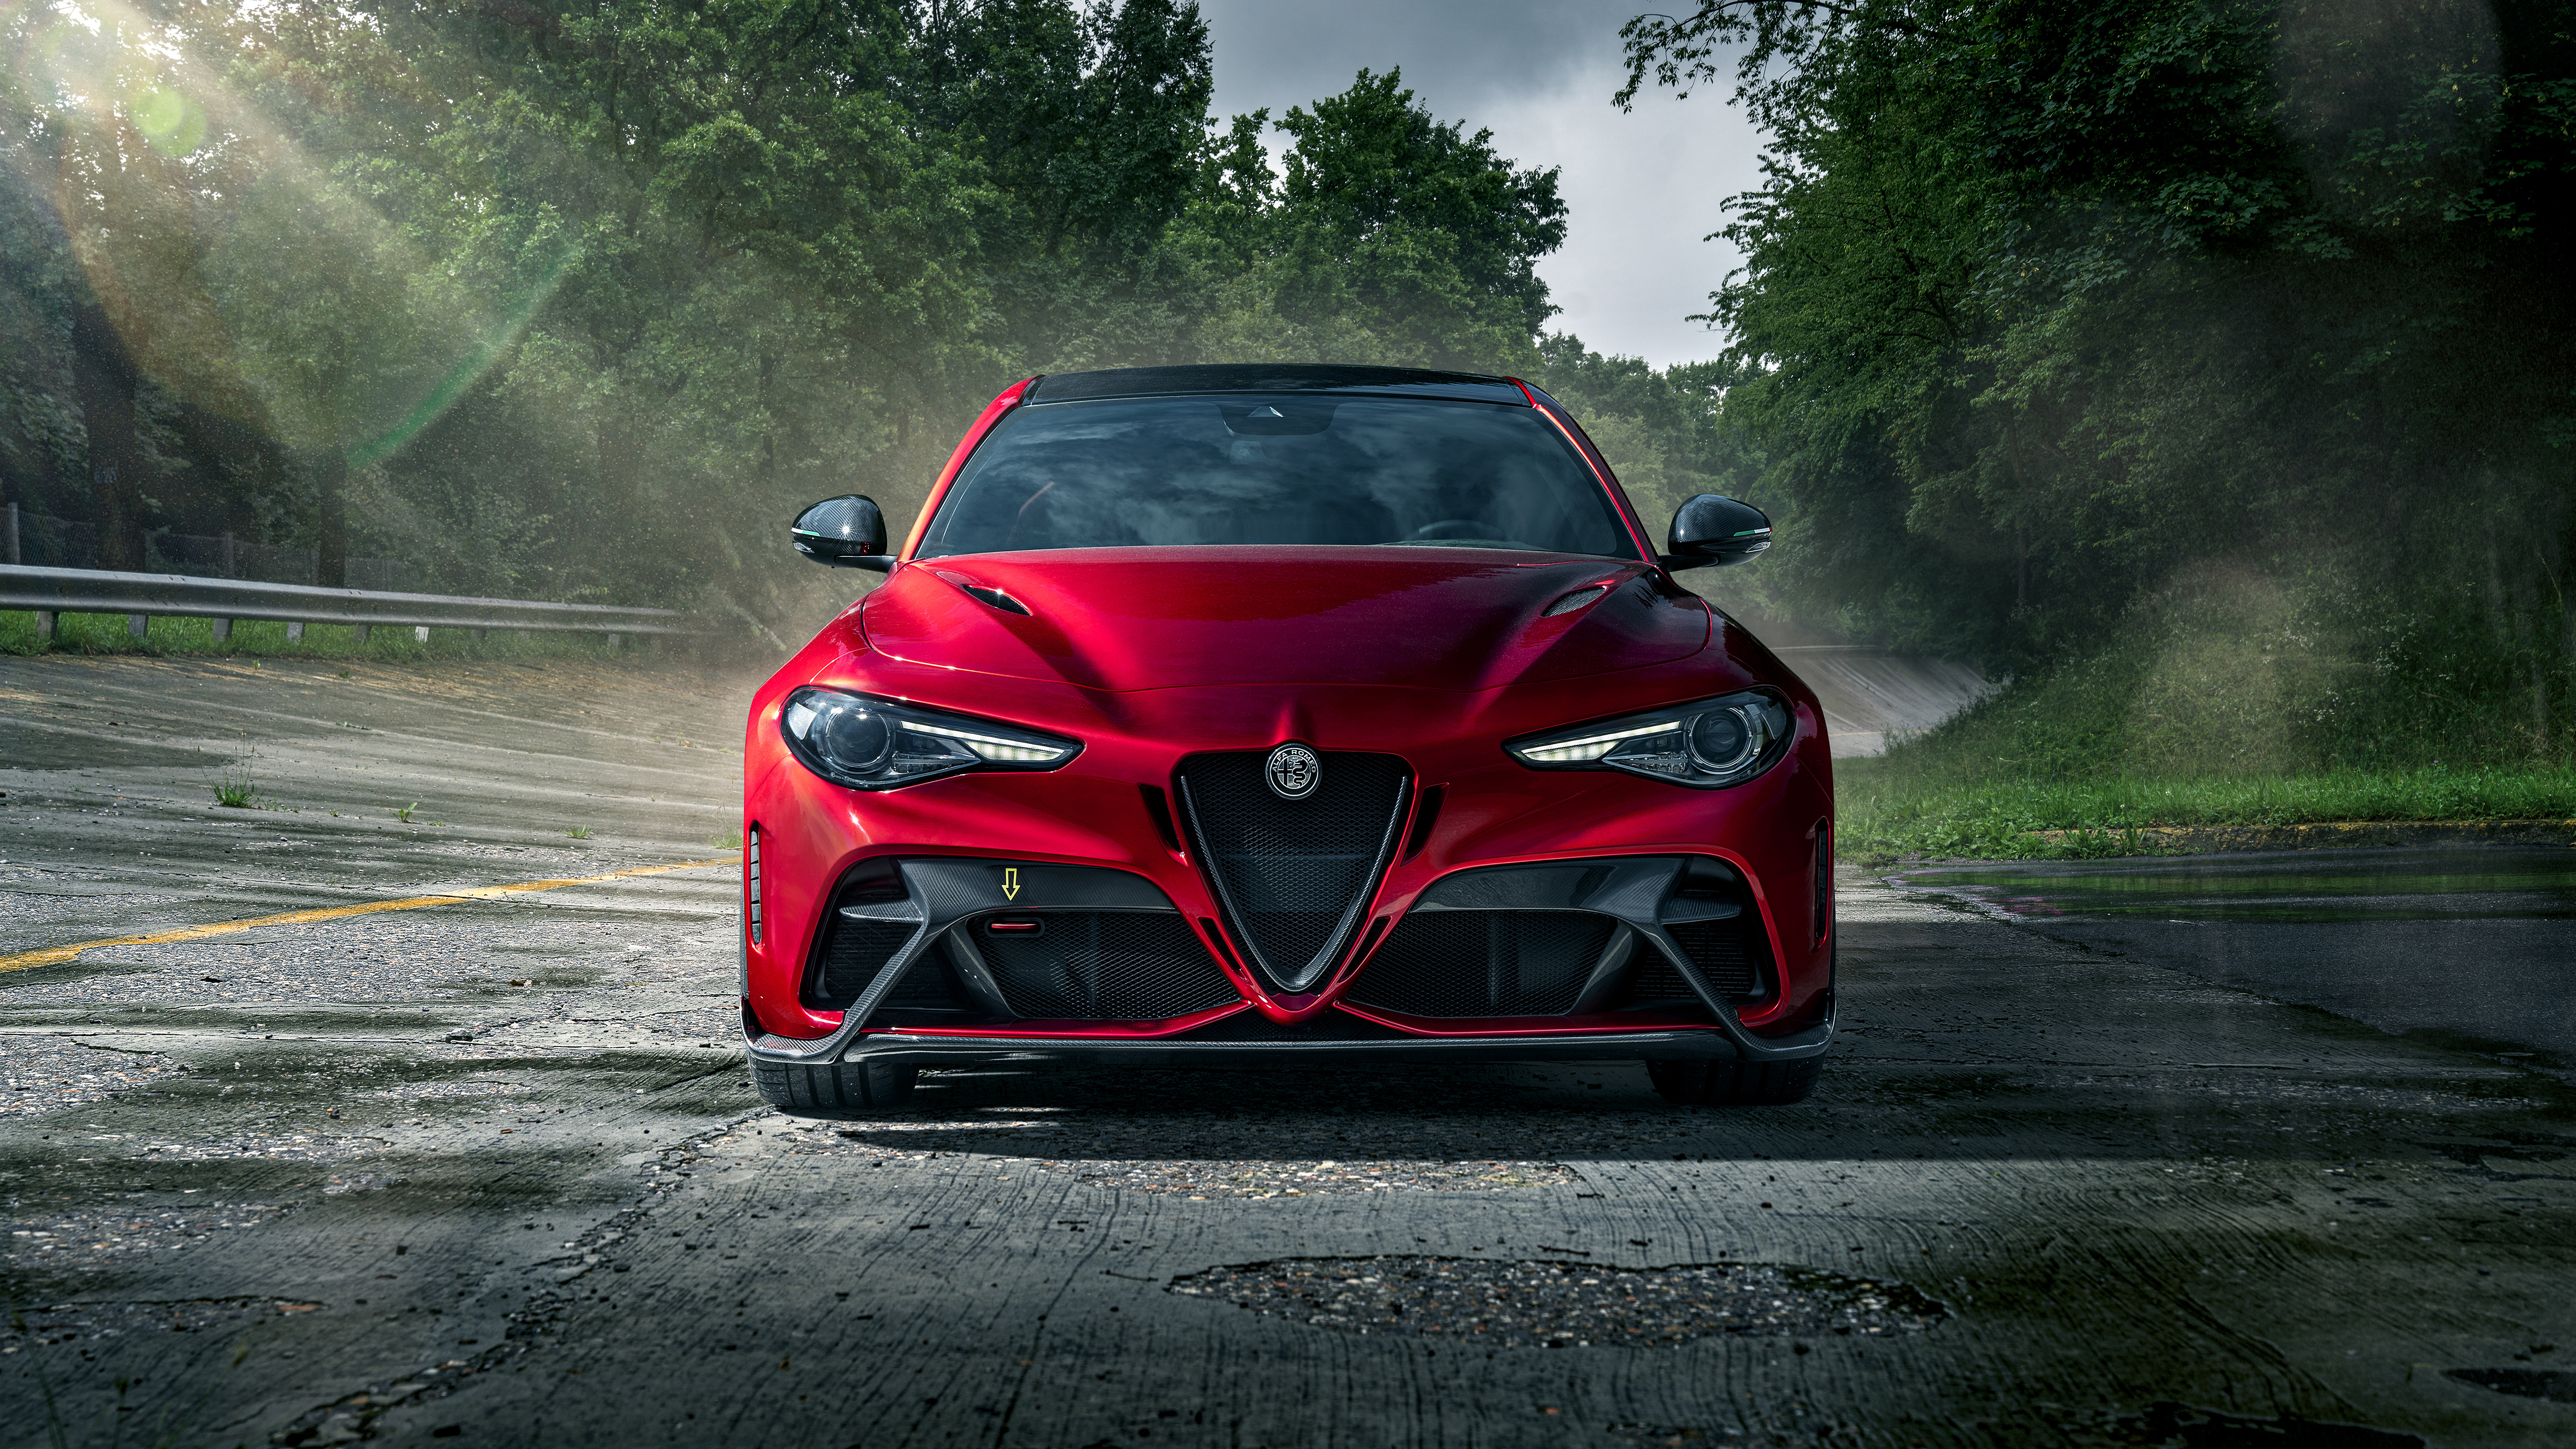 Red Alfa Romeo Giulia Gtam 2021 Front View Wallpapers And Images Wallpapers Pictures Photos